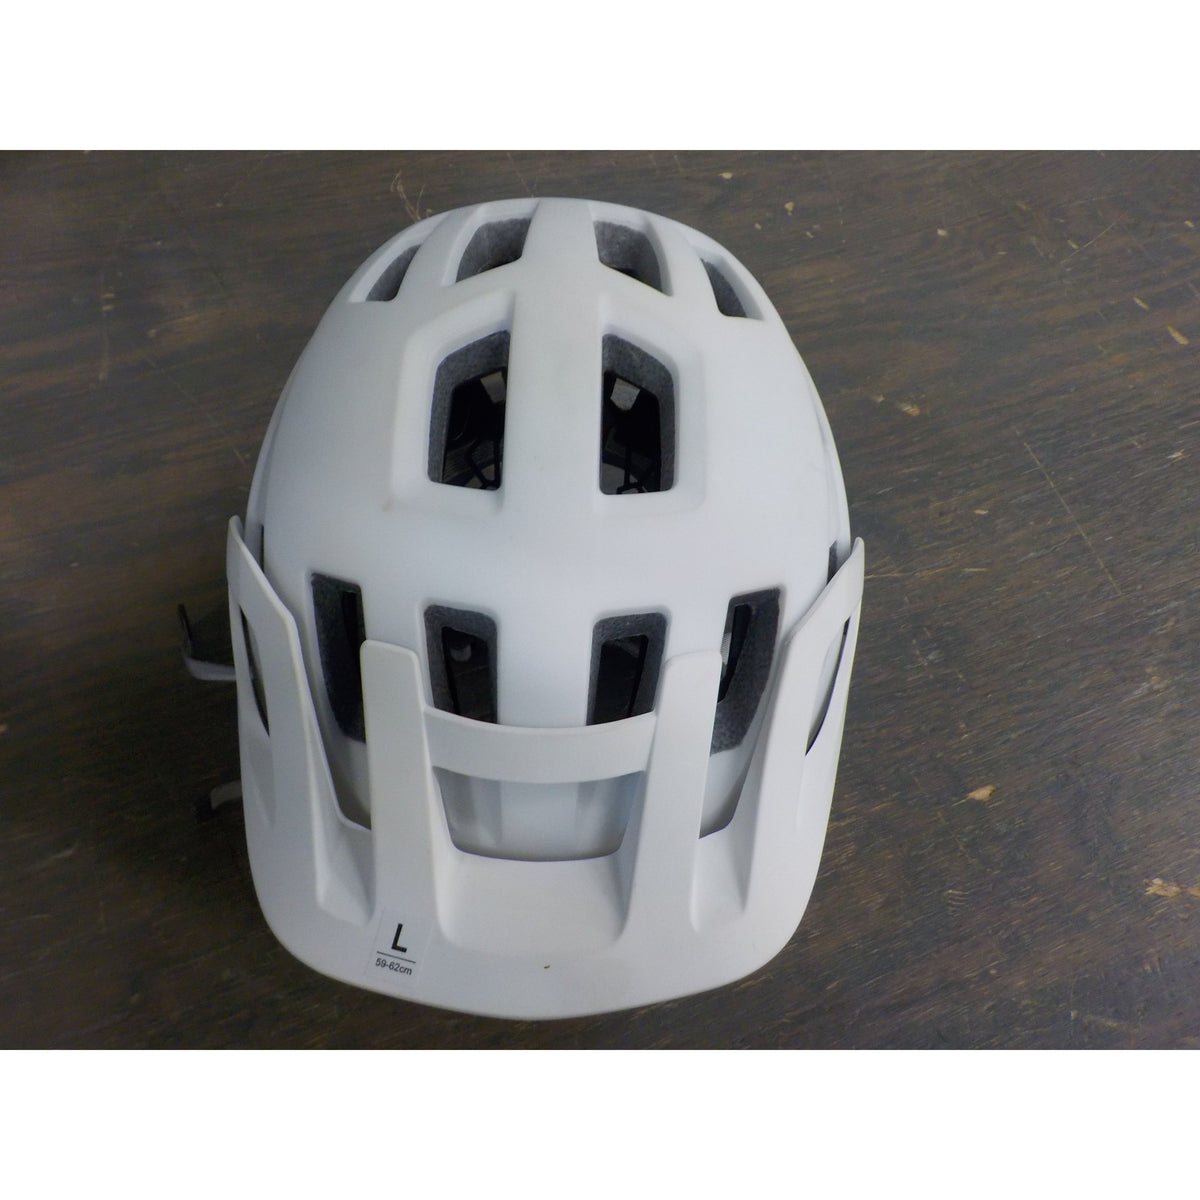 Smith Optics Engage MIPS Bike Helmet - Matte White/Cement - Large - Used - Acceptable